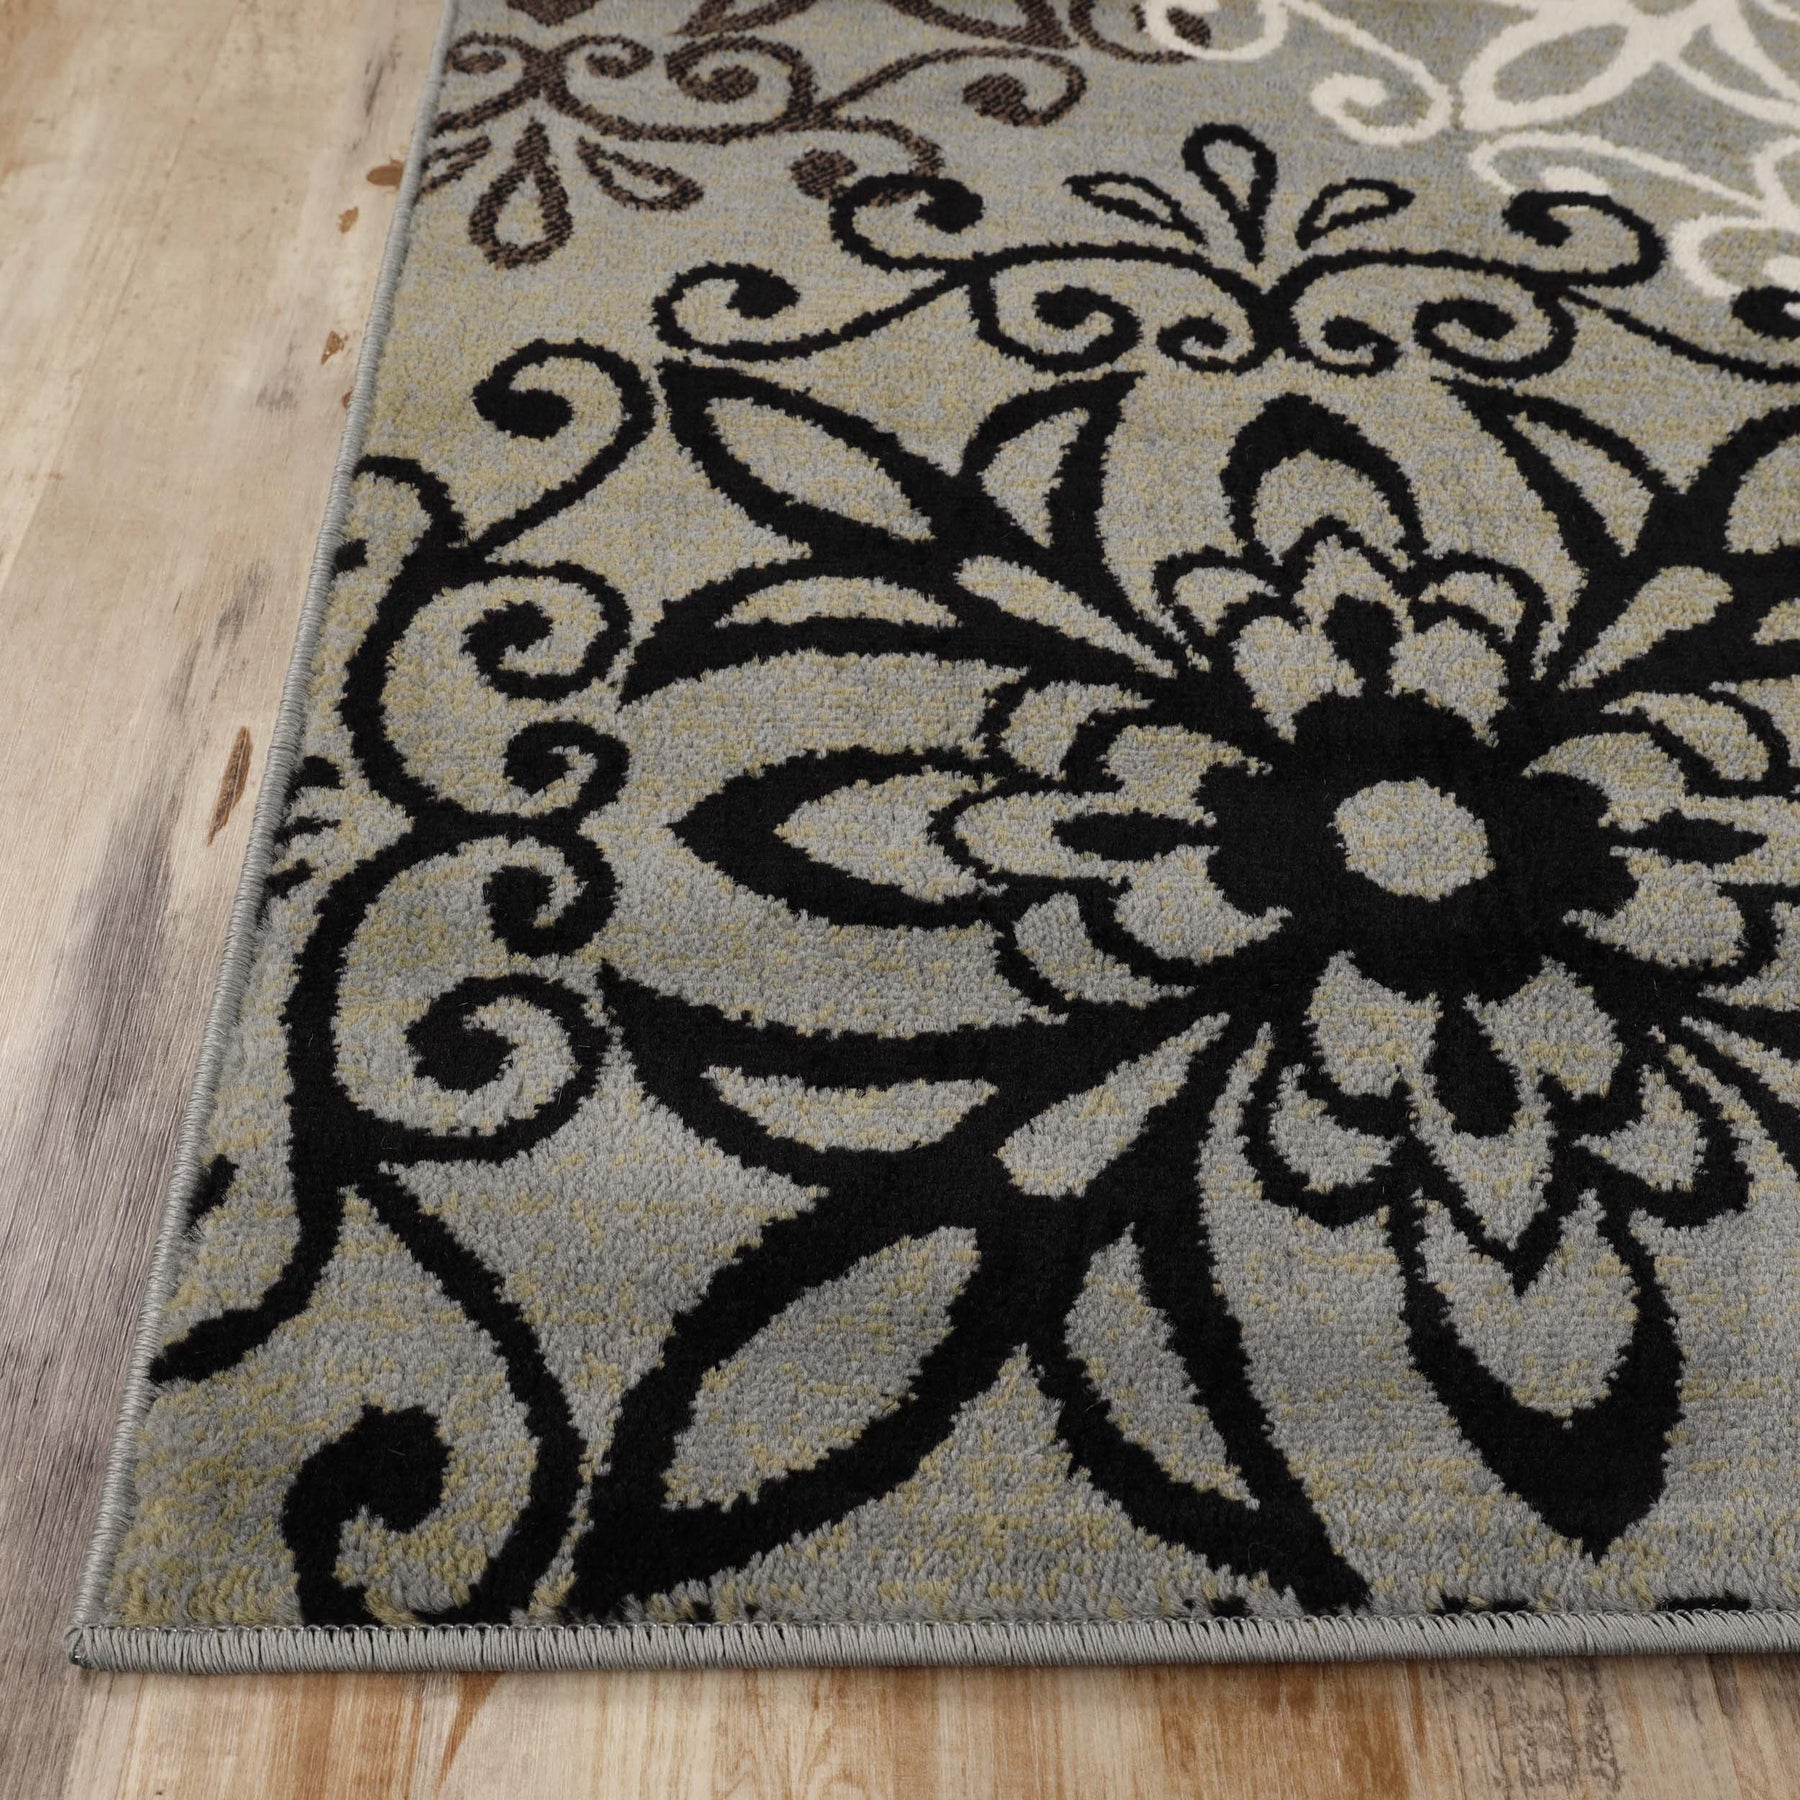 Leigh Traditional Floral Scroll Indoor Area Rug or Runner Rug Or Door Mat - Blue